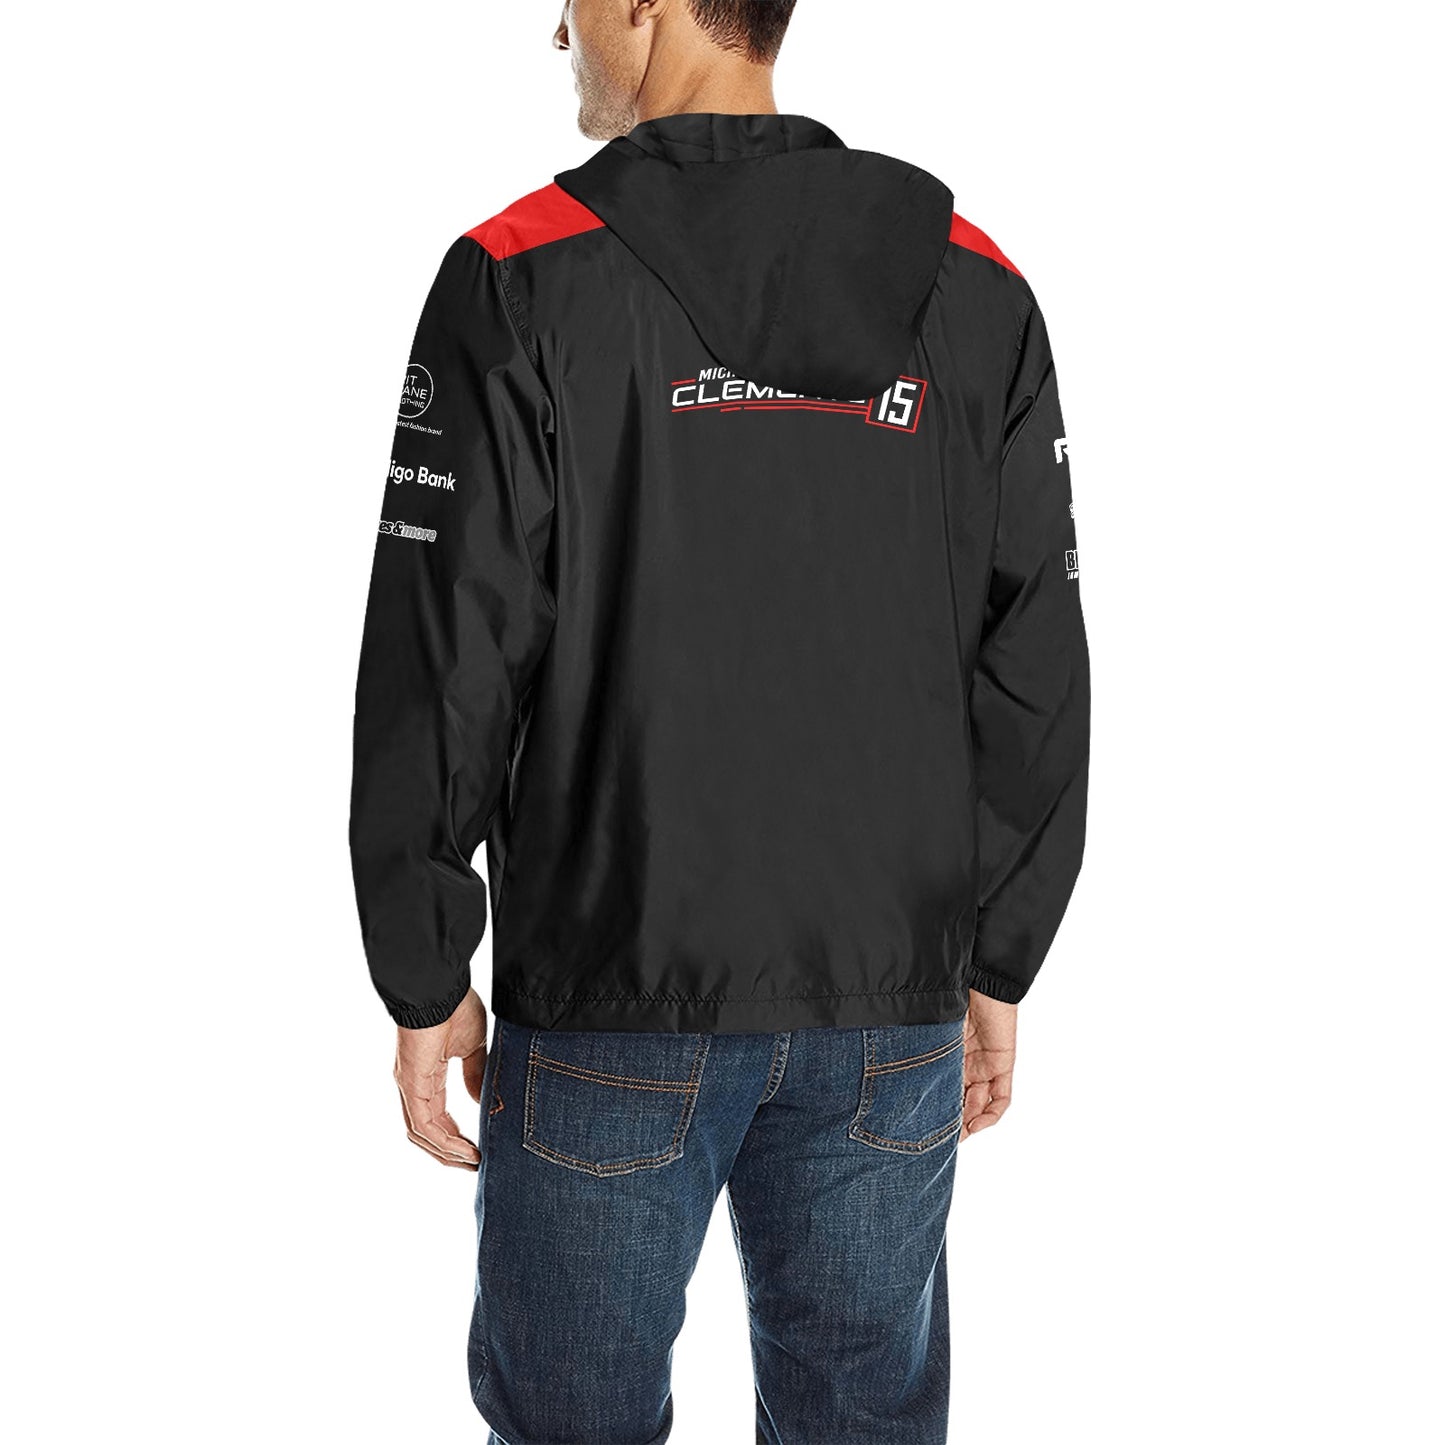 MICHAEL CLEMENTE 15 Quilted Windbreaker - official Team wear